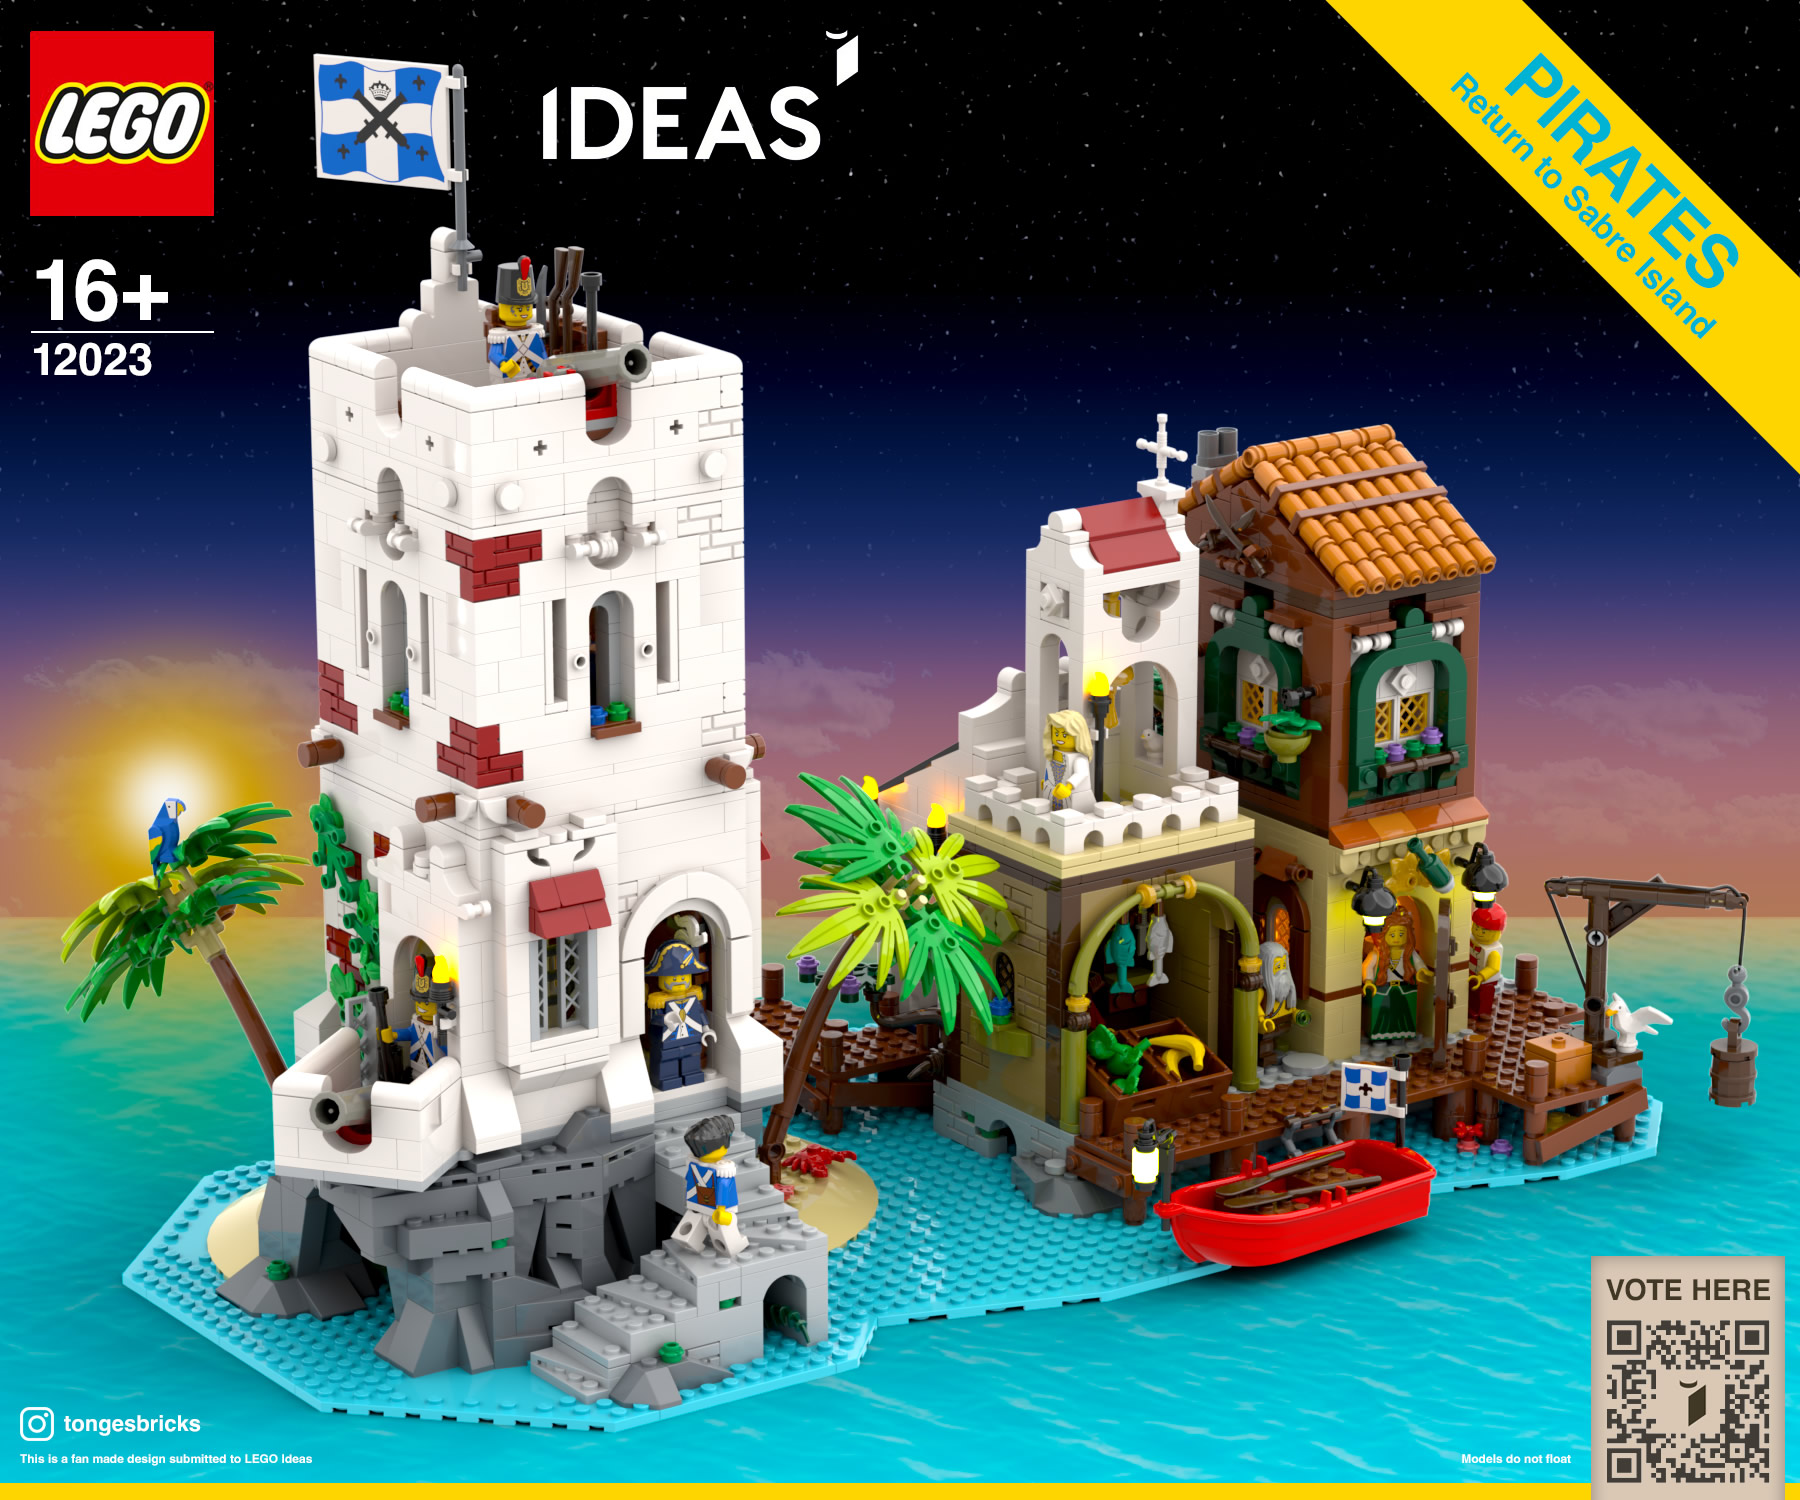 Yes you can make this a real Lego set! It is free and easy to support! If 1  out of every 3 people support you could get Lego to remake this into